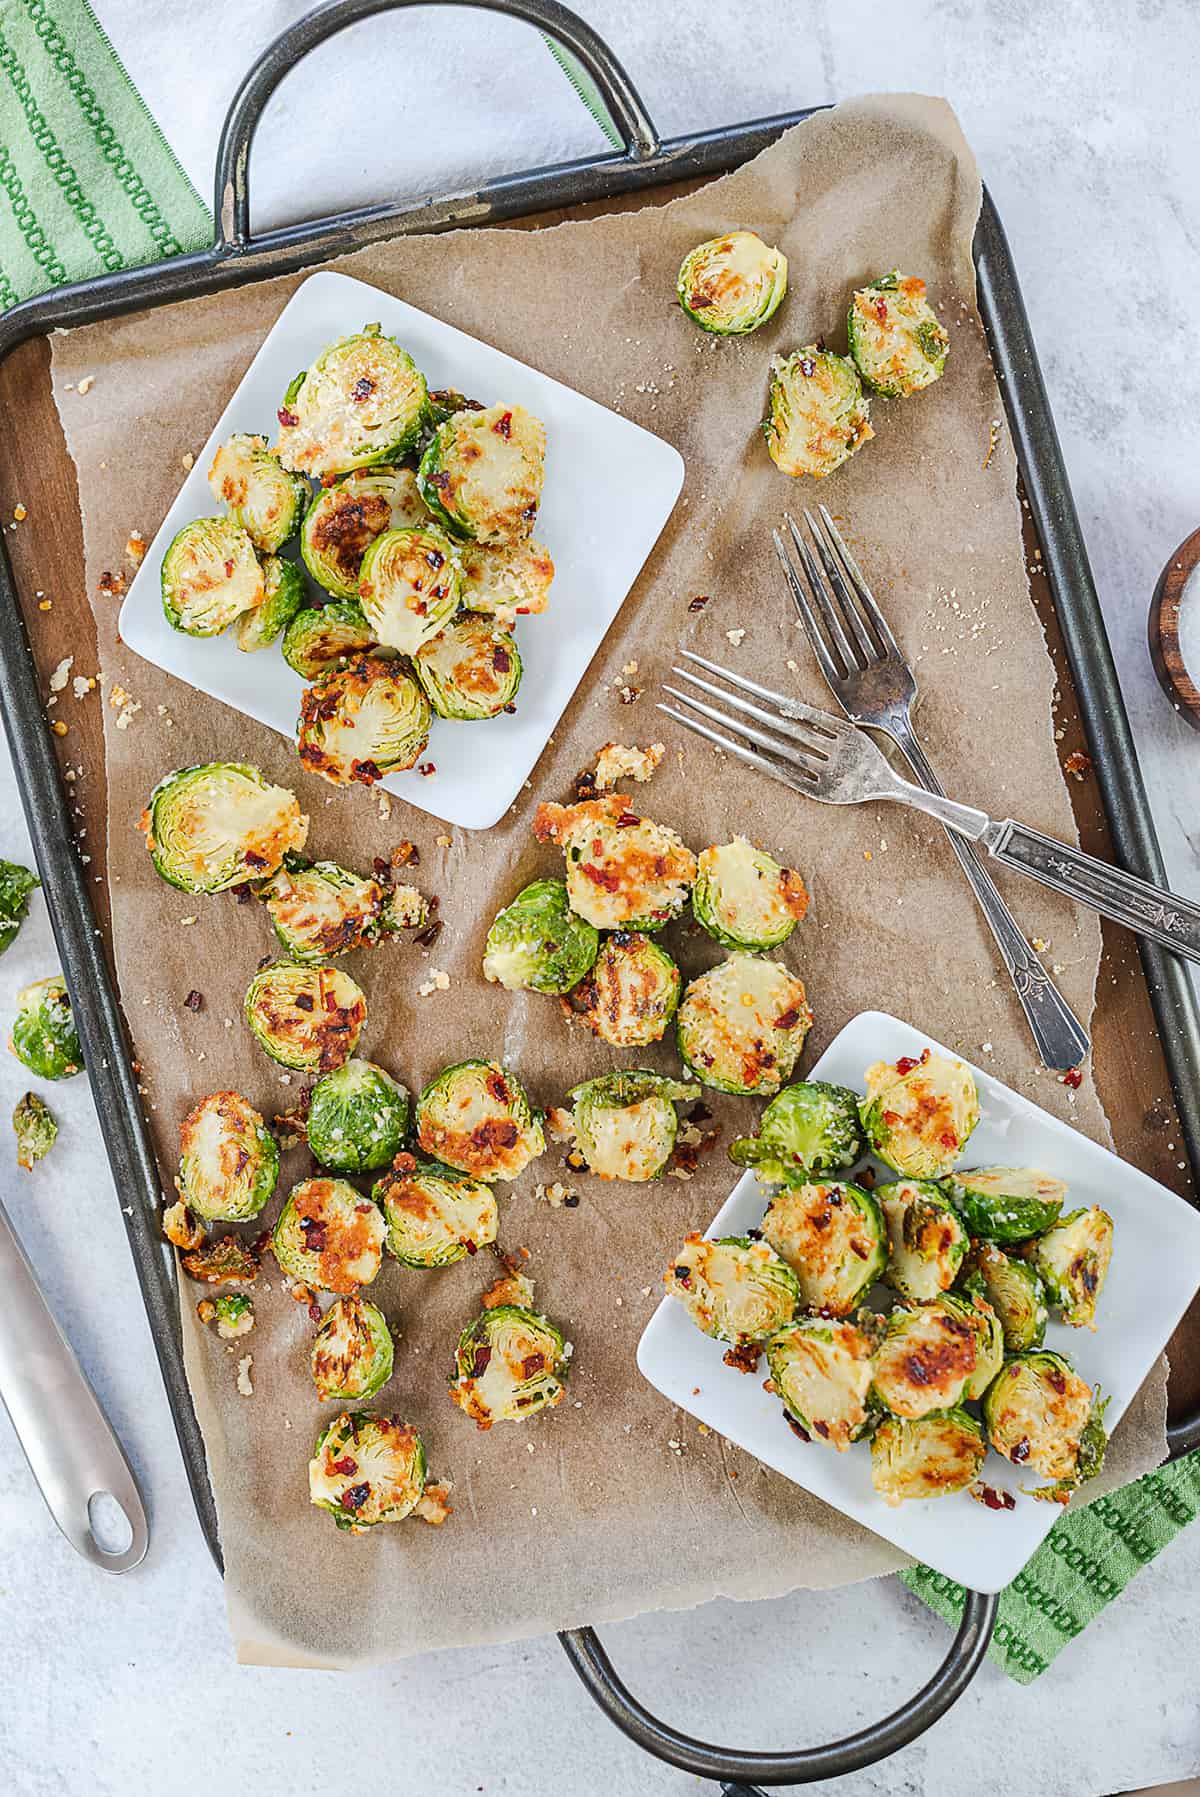 crispy roasted Brussels sprouts recipe on tray.